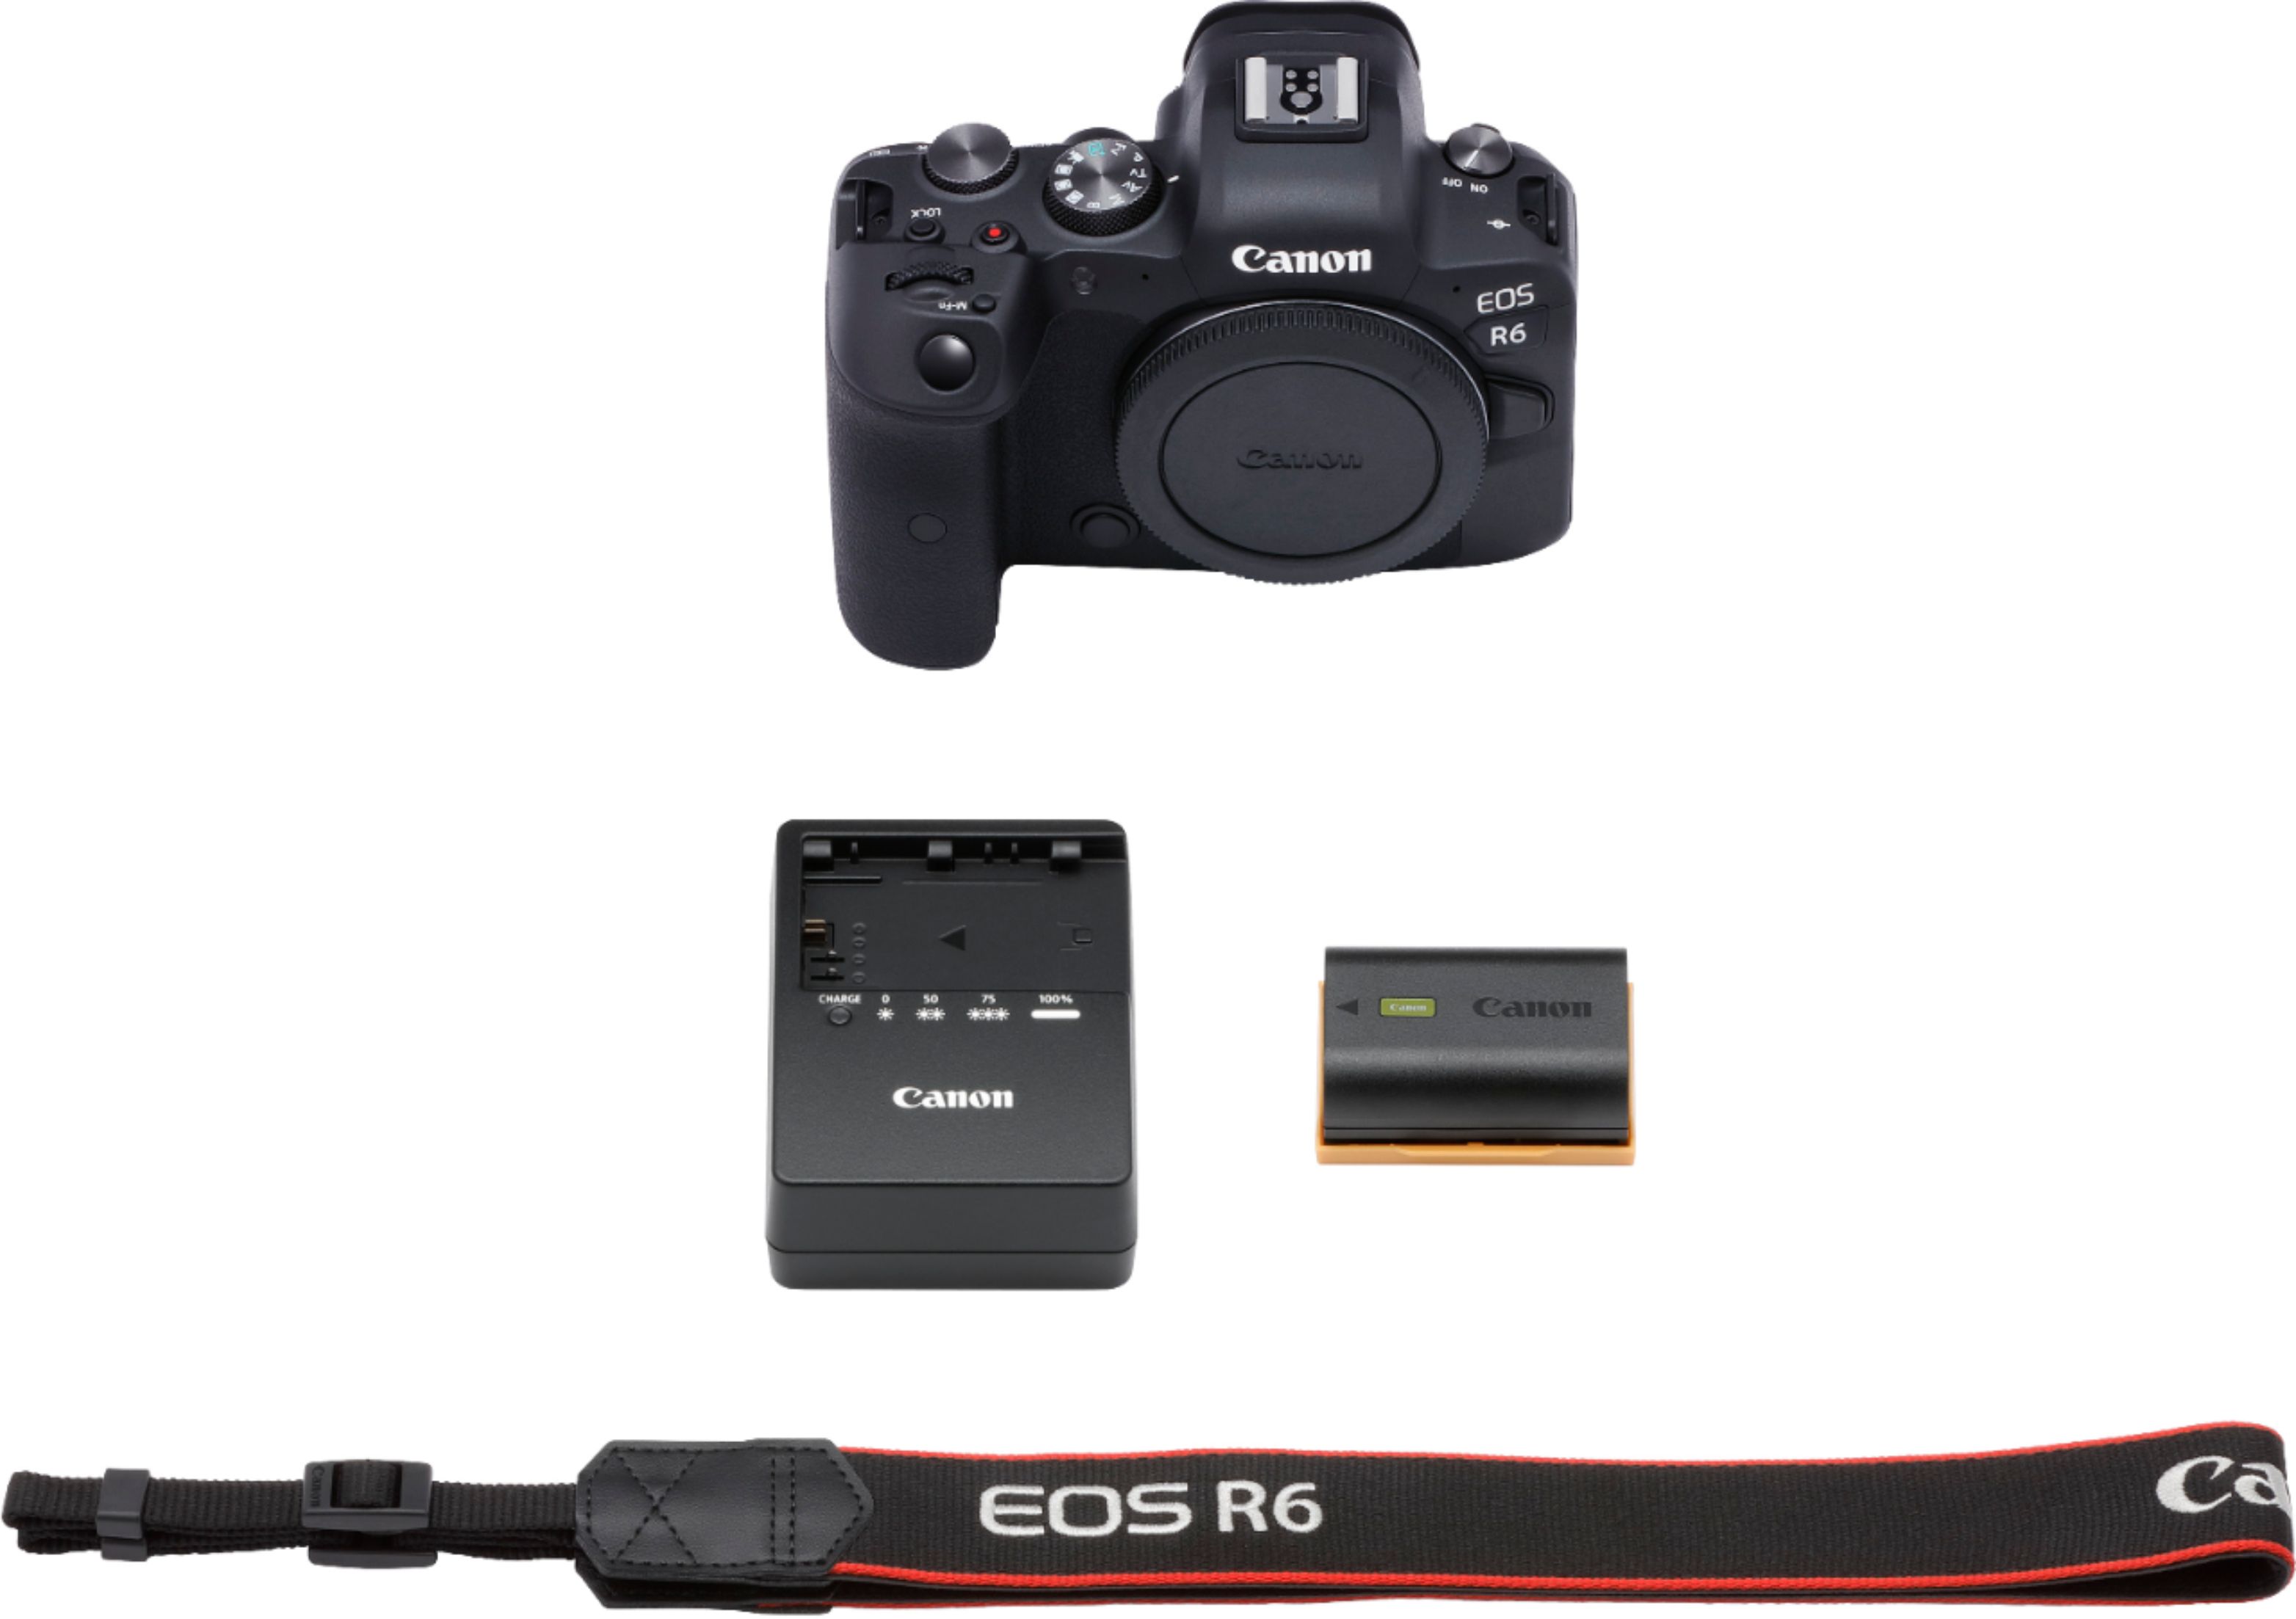 Black Buy: R6 Mirrorless Camera Canon (Body EOS Best 4082C002 Only)